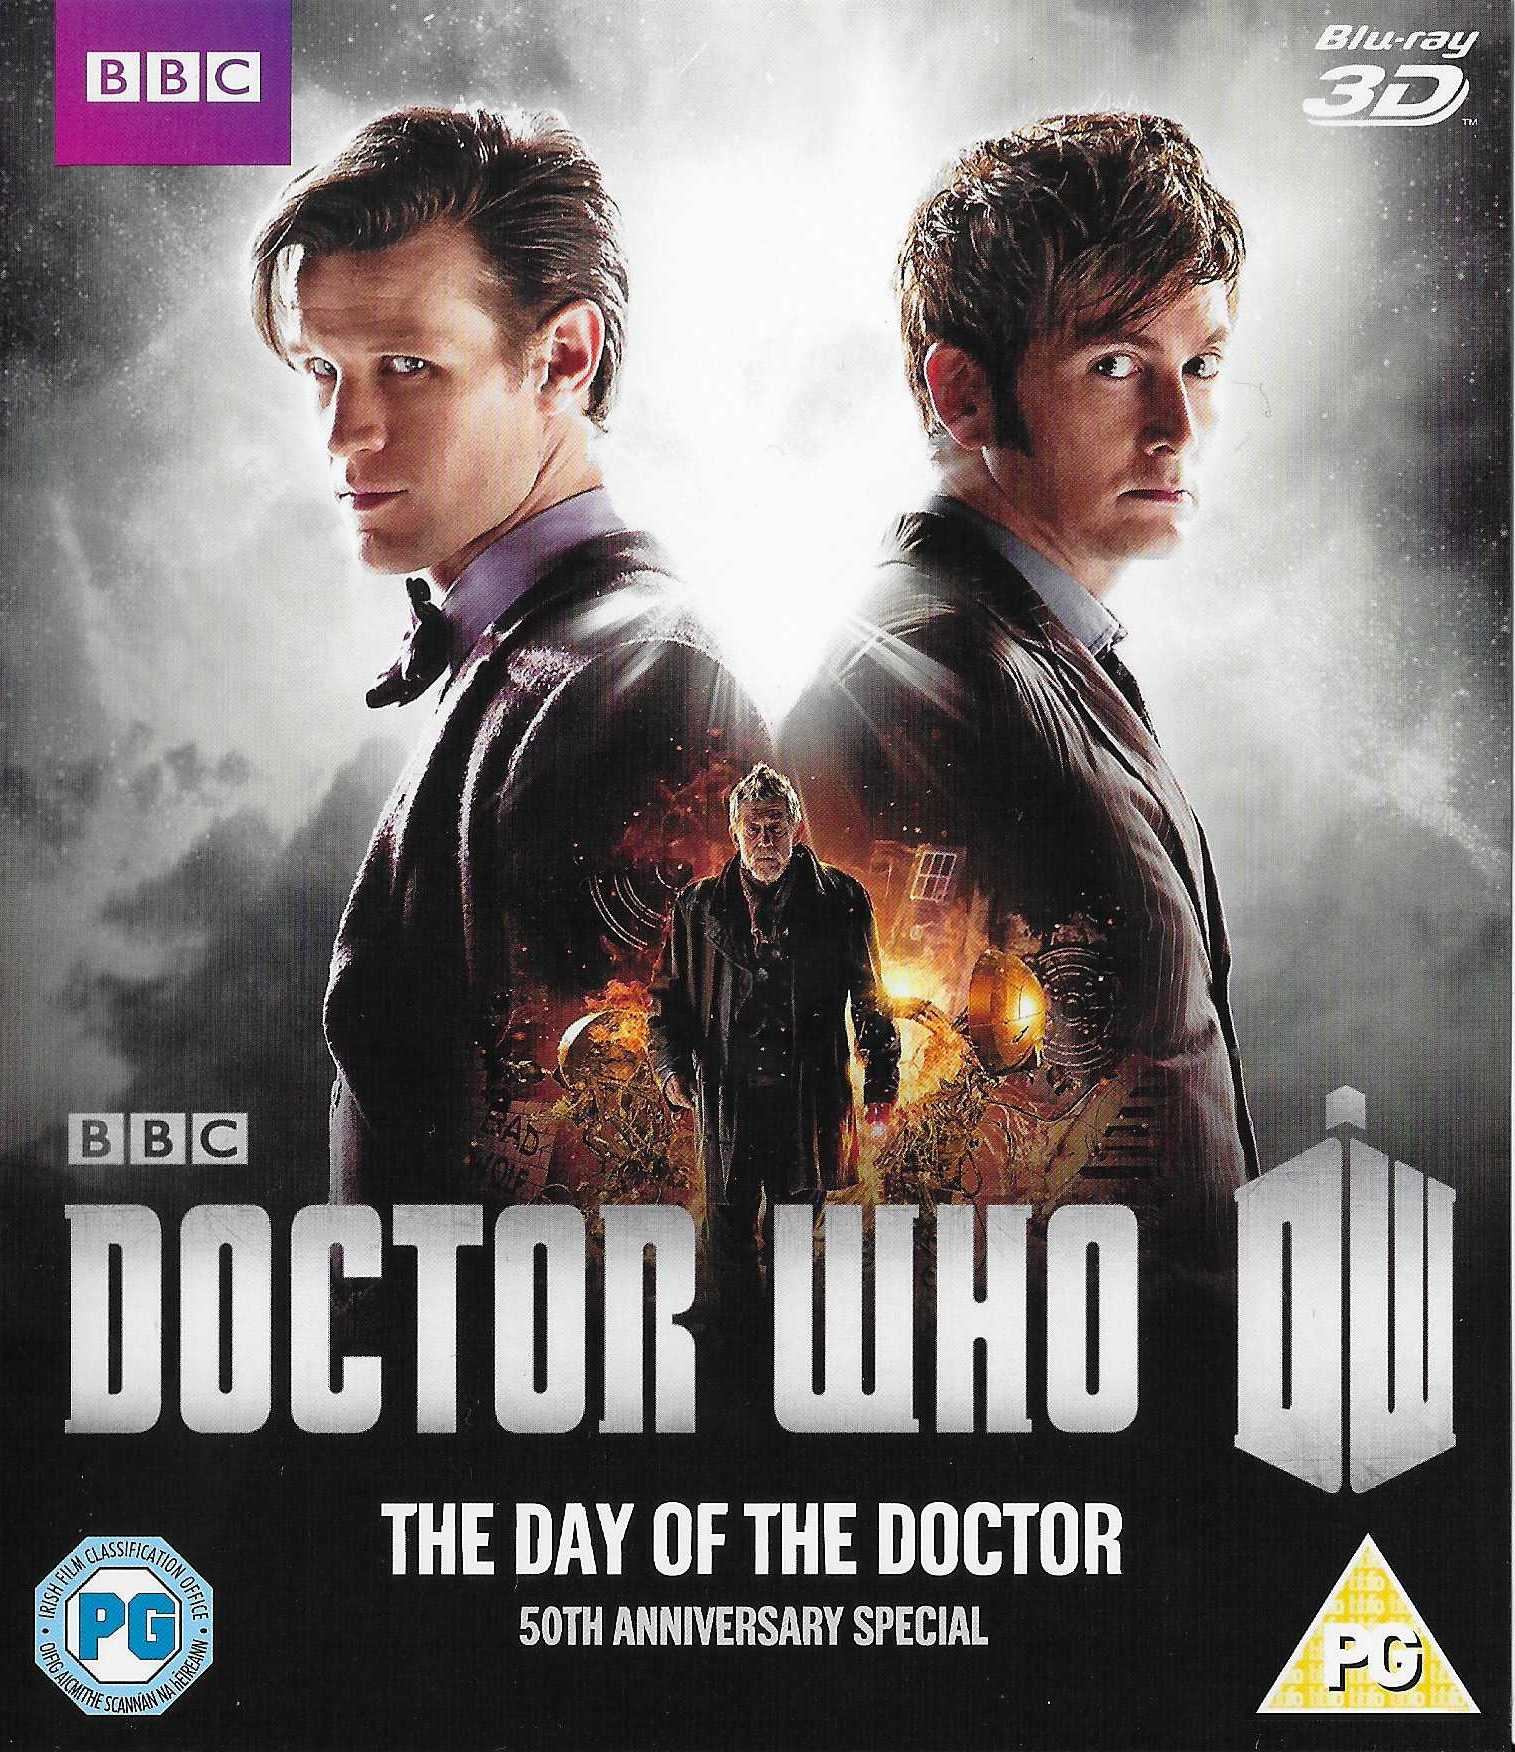 Picture of BBC3DBD 0248 Doctor Who - The day of the Doctor \(50th anniversary special\) by artist Steven Moffat from the BBC records and Tapes library